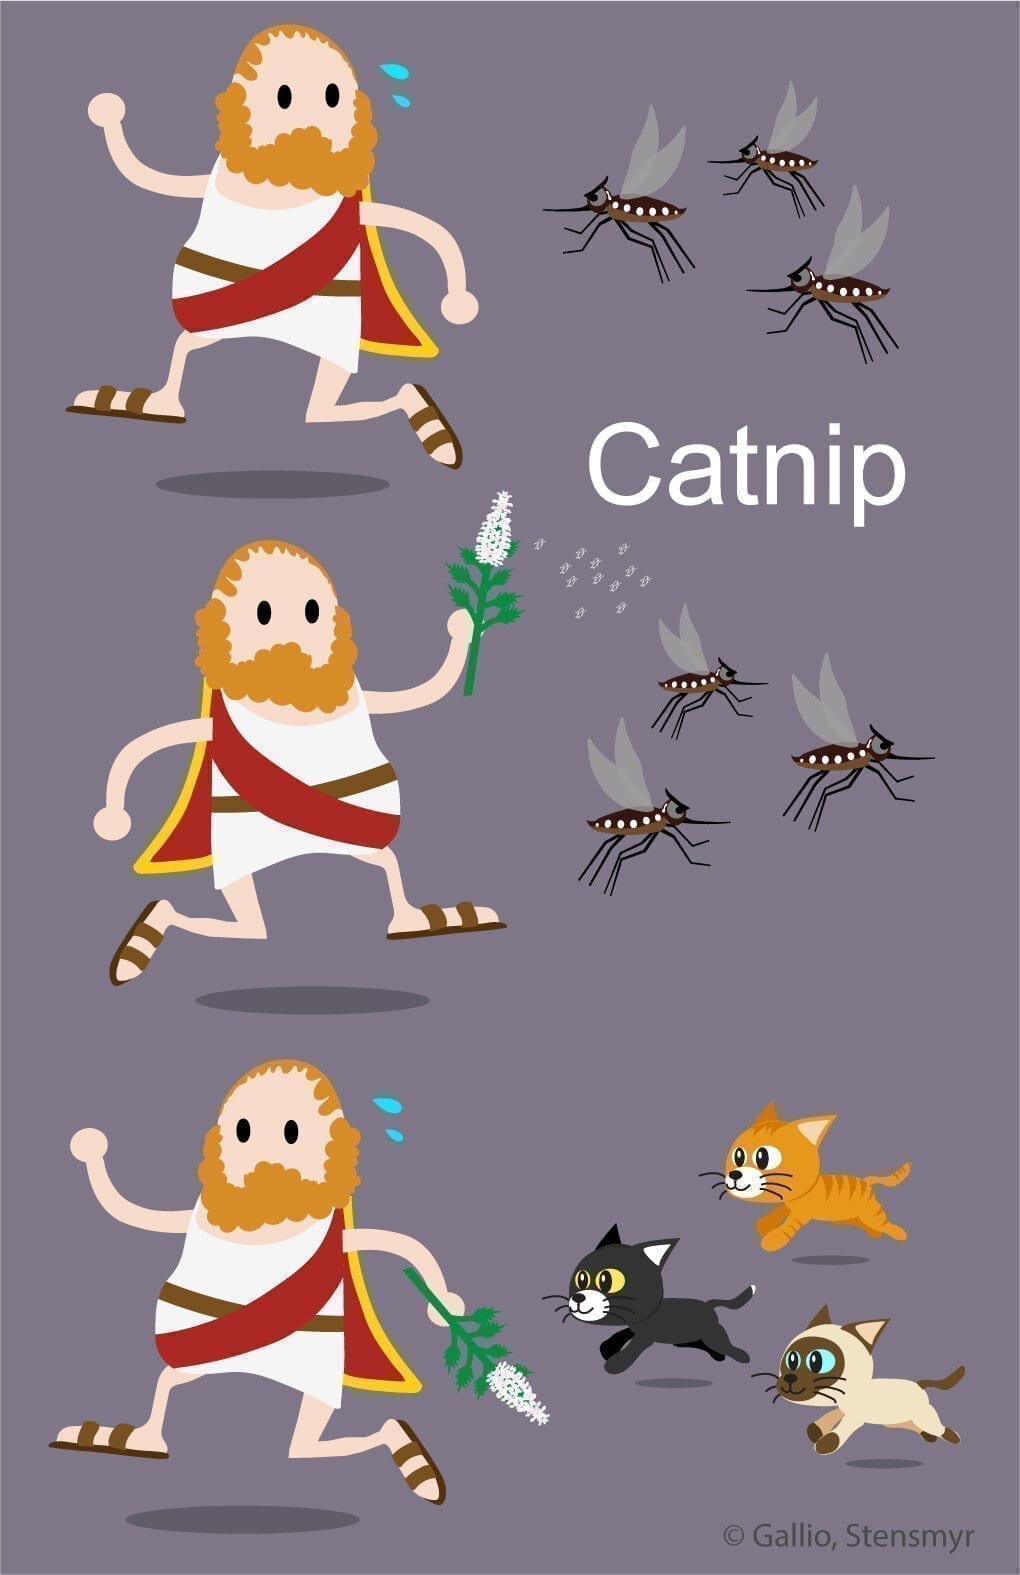 Yes, catnip shows promise as a new natural insect repellent